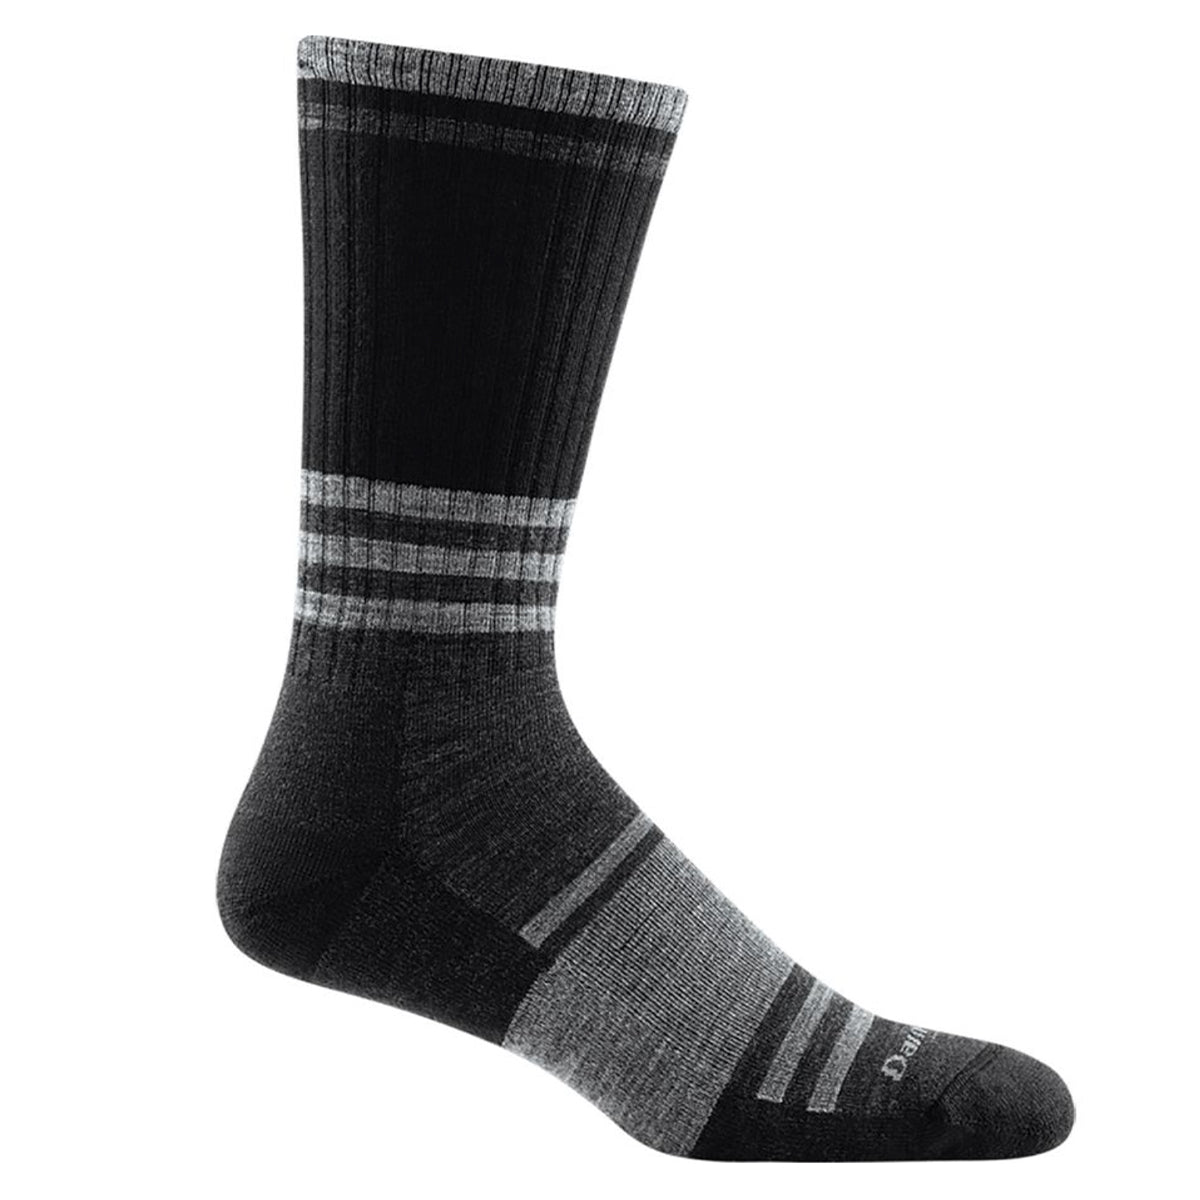 Darn Tough 1952 Men's Spur Boot Lightweight Hiking Sock in Charcoal by GOHUNT | Darn Tough Vermont - GOHUNT Shop